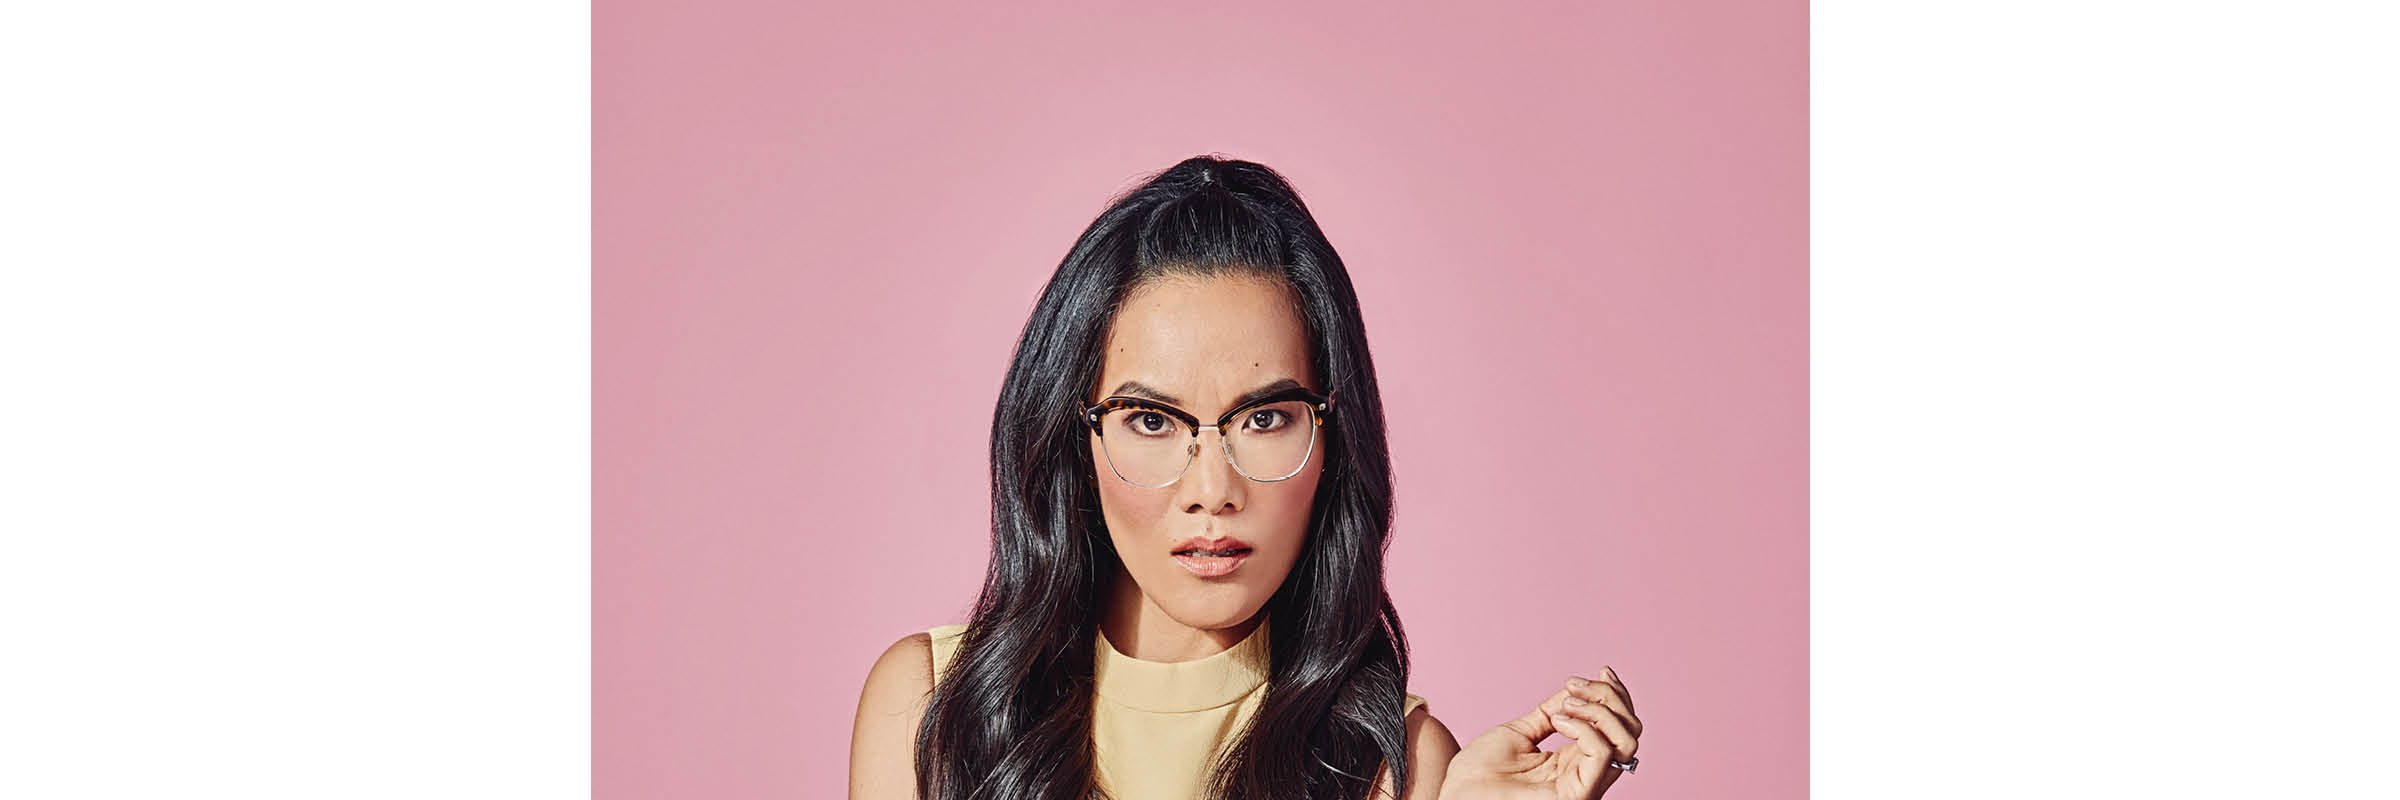 Bank of America Performing Arts Center Thousand Oaks Ali Wong The